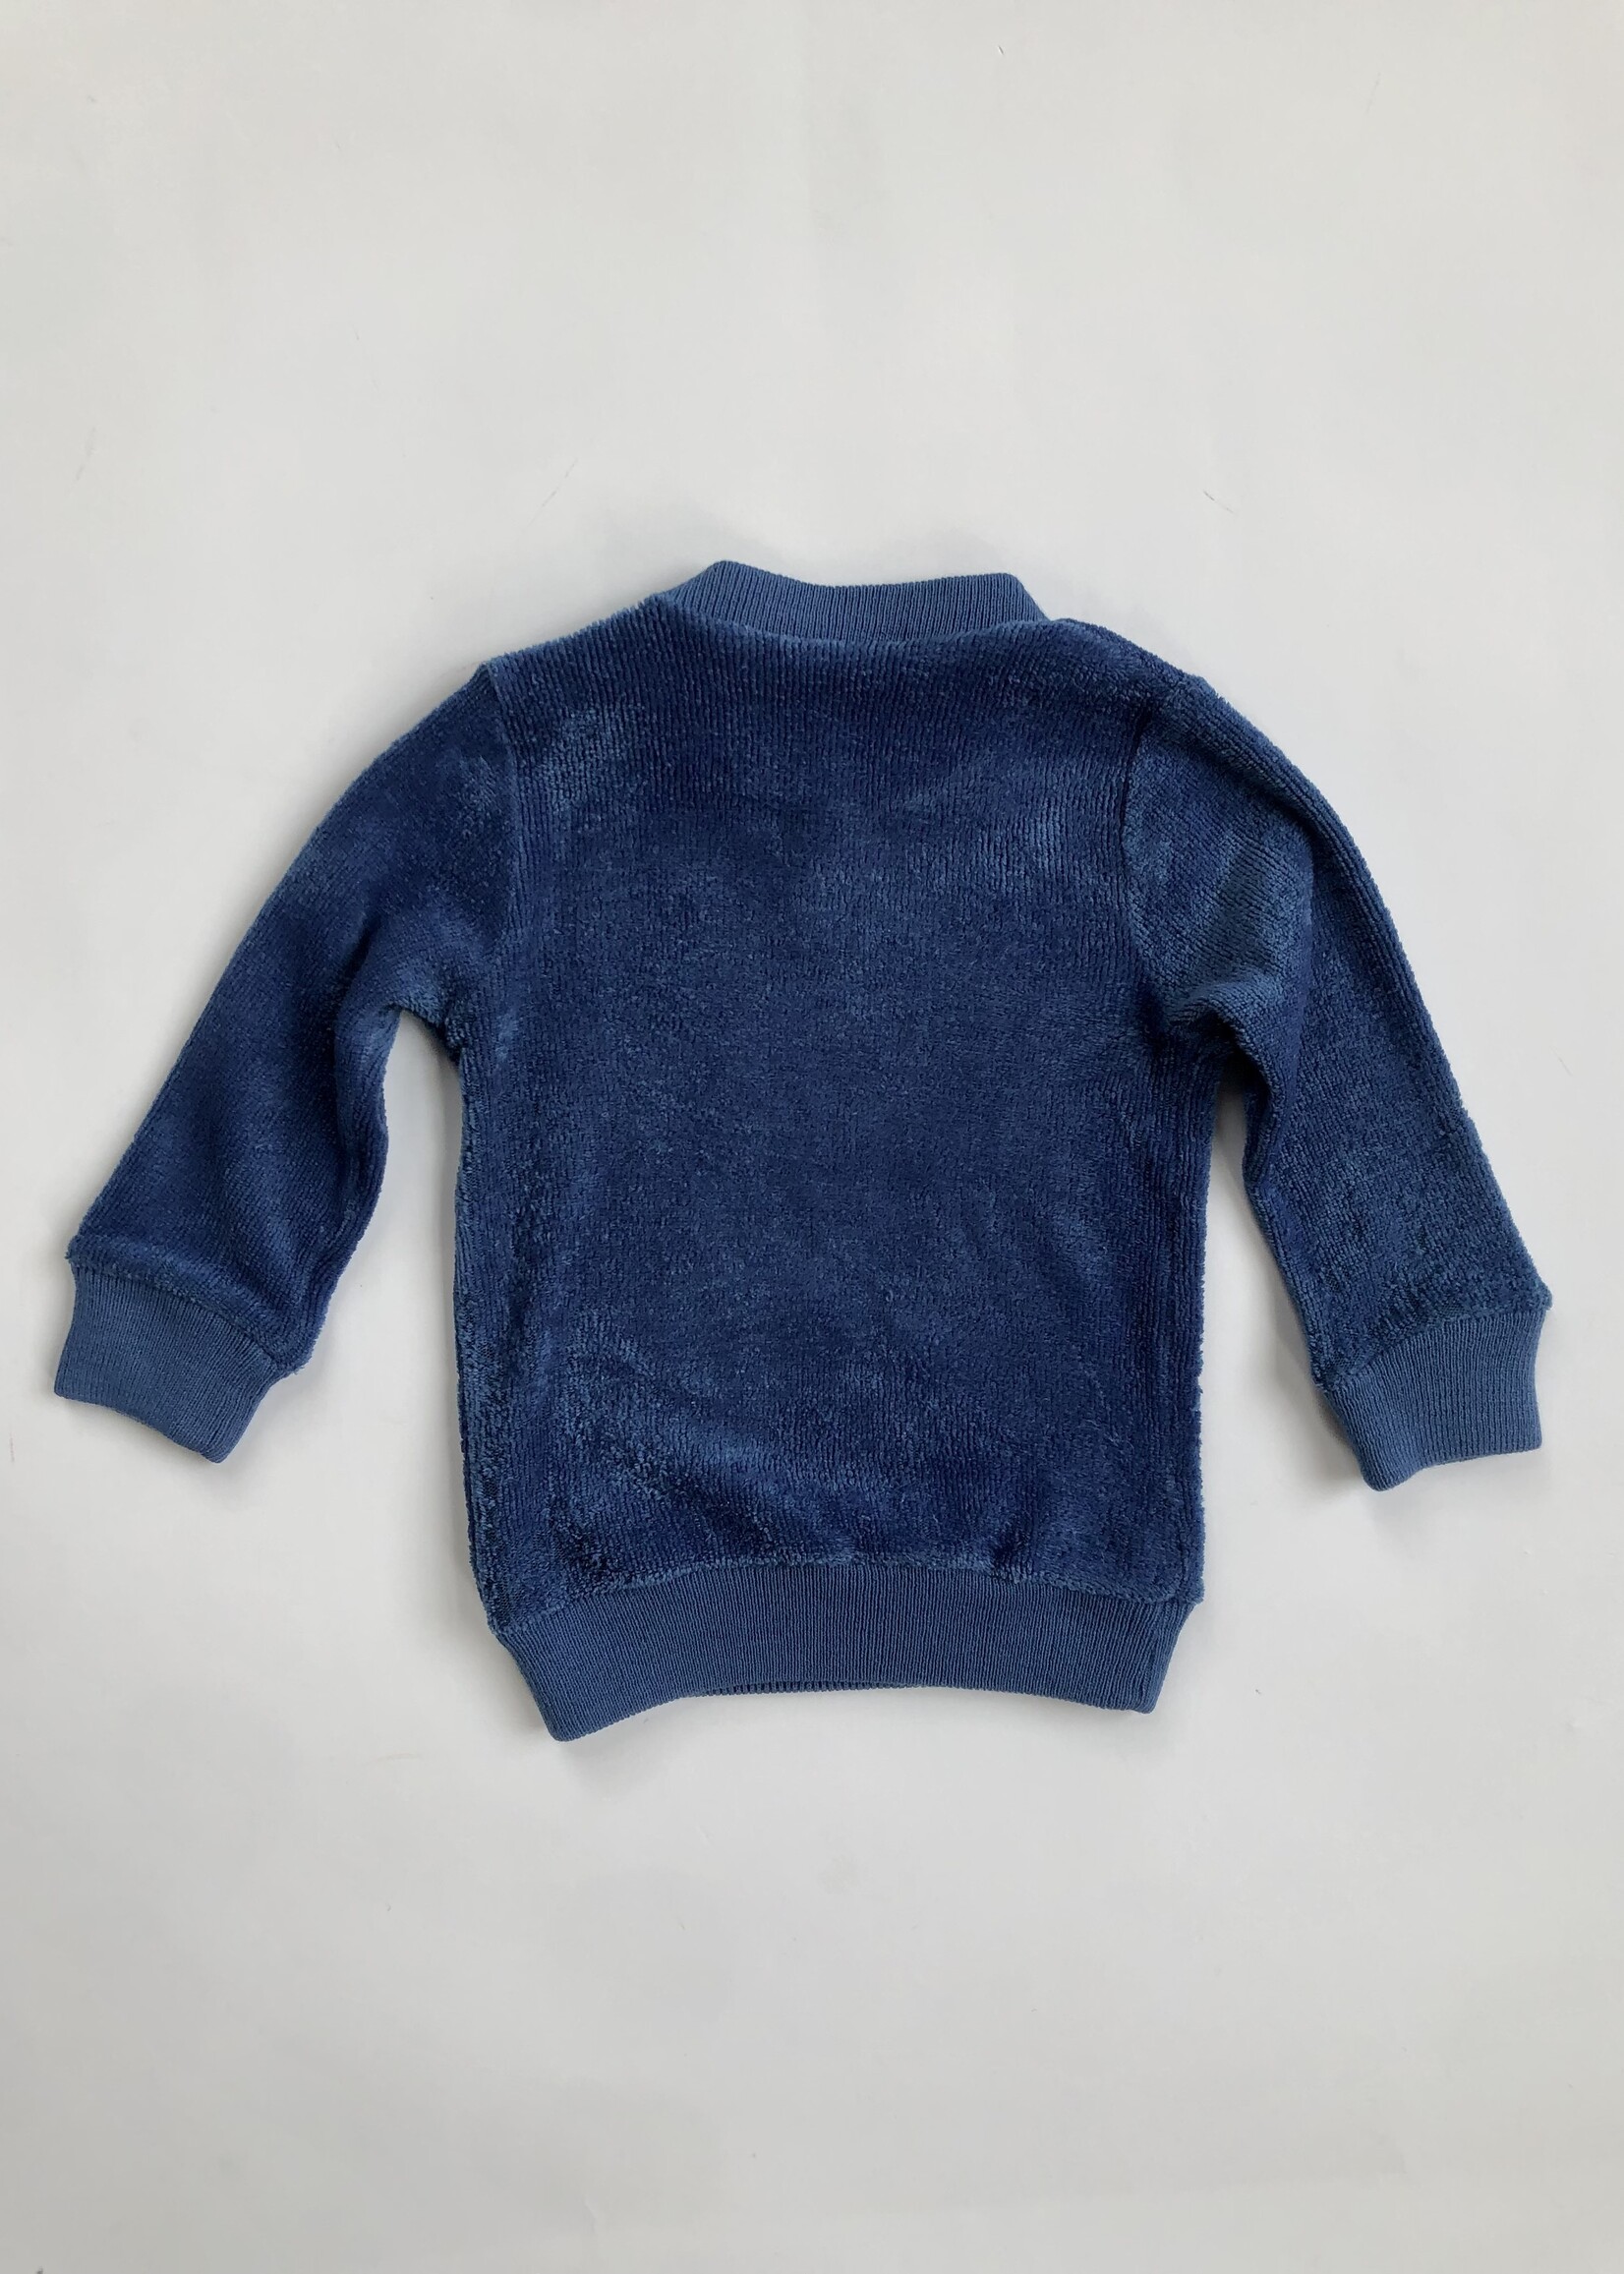 Terry cloth Bowling sweater 9m